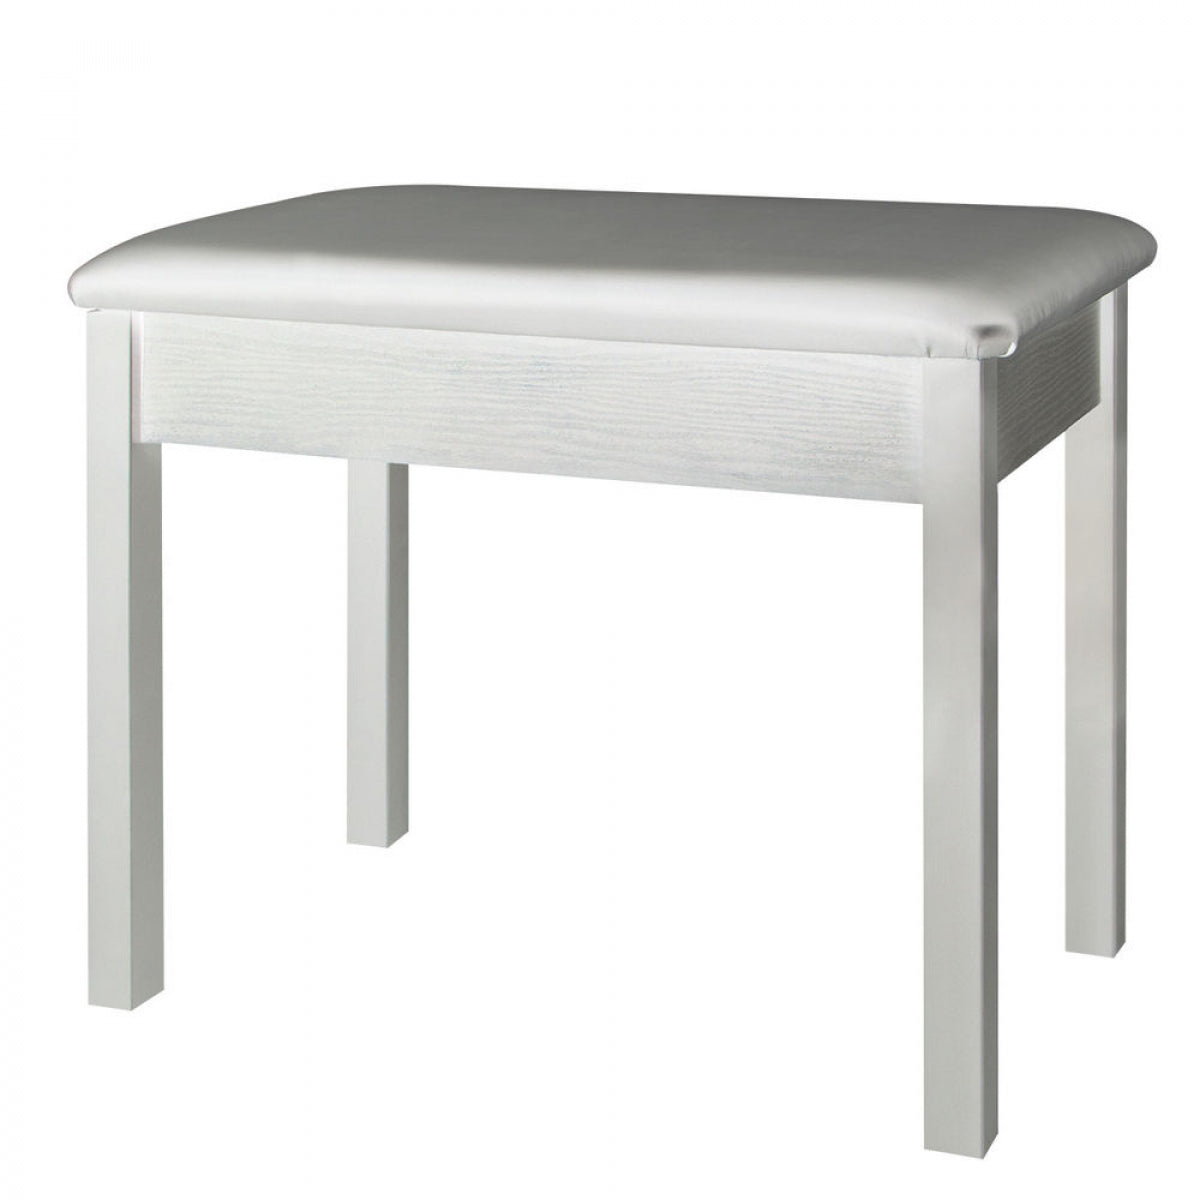 Main image of On-Stage KB305W Furniture-Style Piano Bench - White